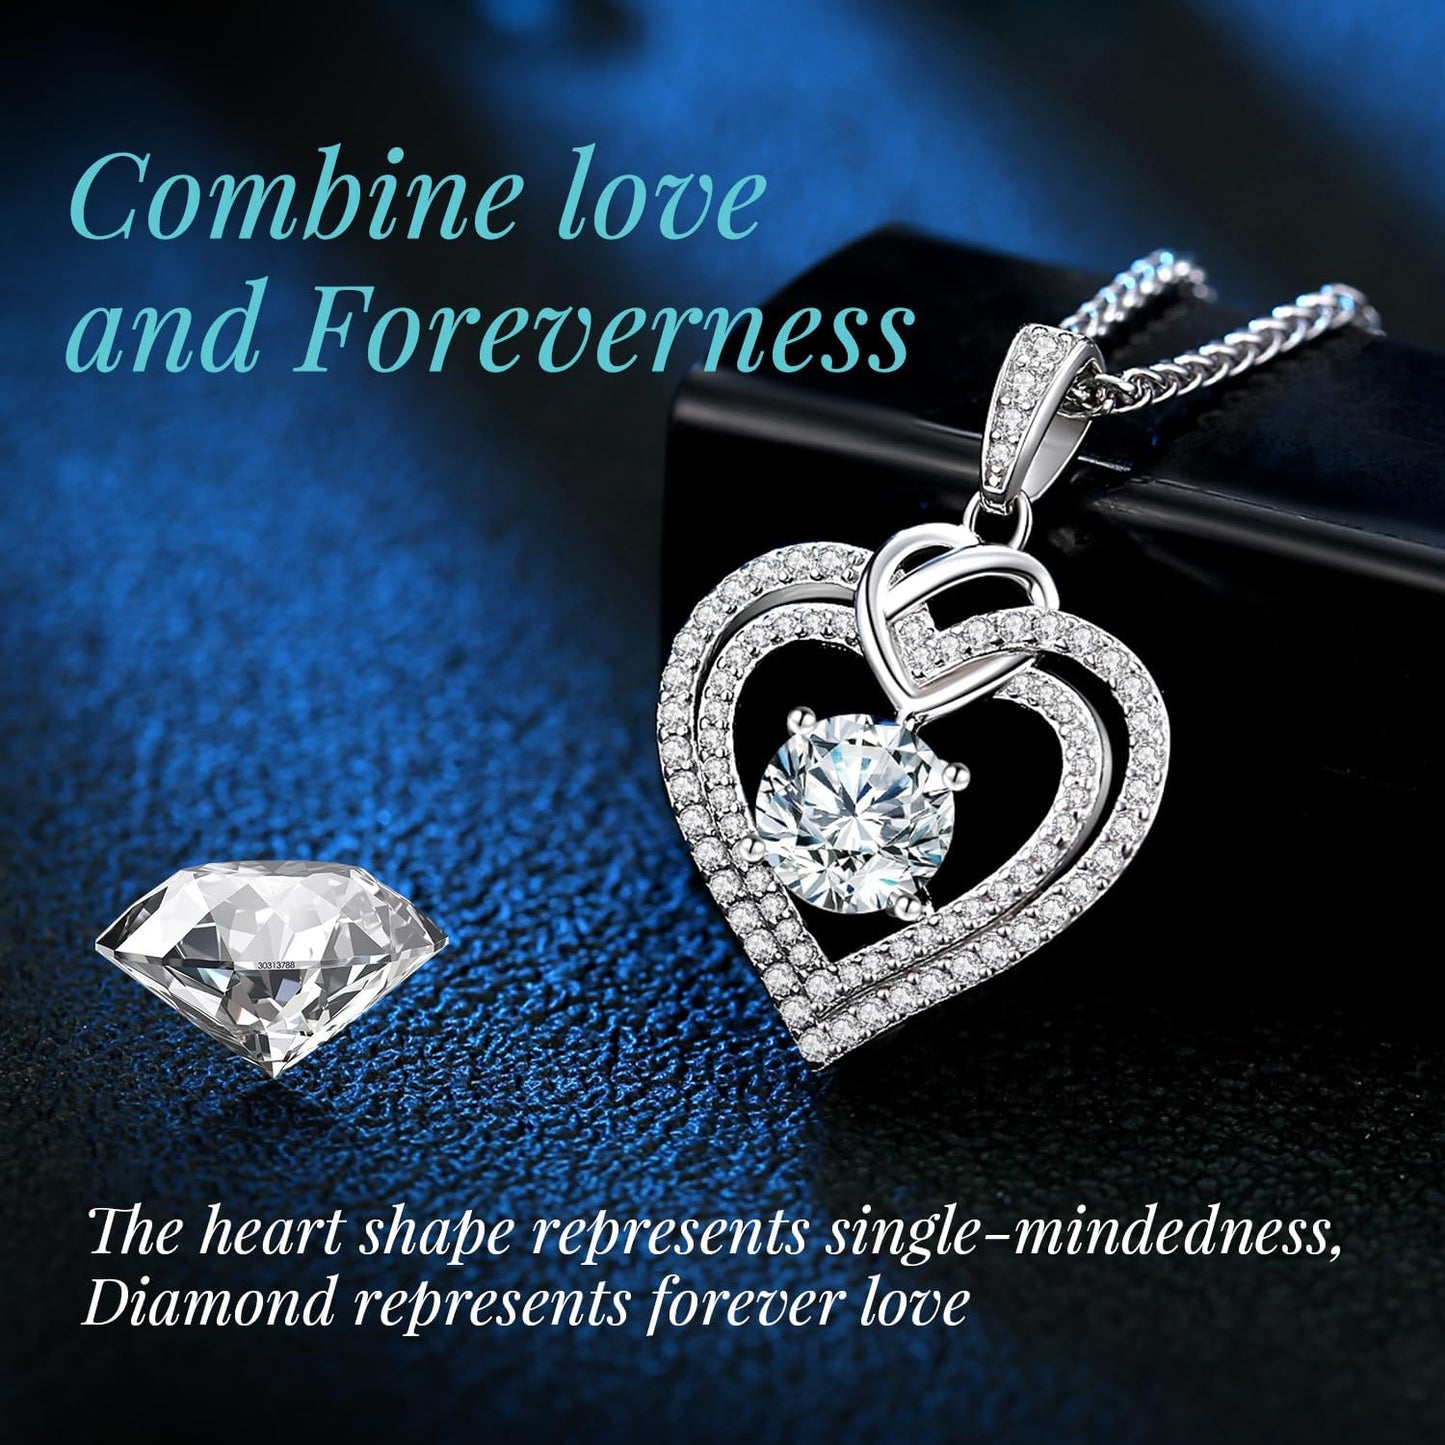 OOBEE Moissanite Diamond Necklace Valentine's Gifts for Women, 925 Sterling Silver Fine Jewelry, Heart Pendant Necklace Birthda